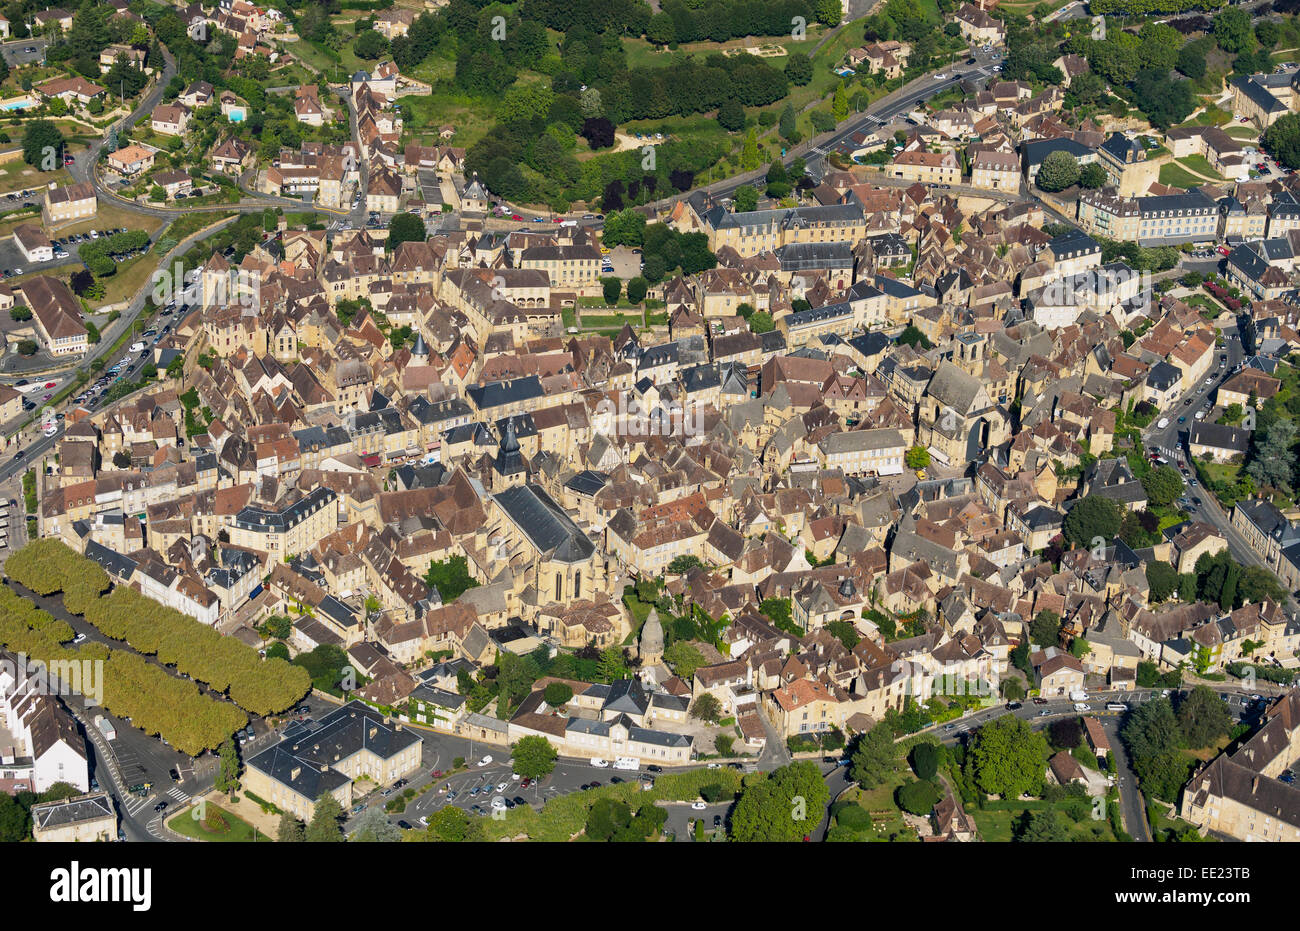 Aerial view: The medieval old town of Sarlat in the Périgord region in southern France. Stock Photo